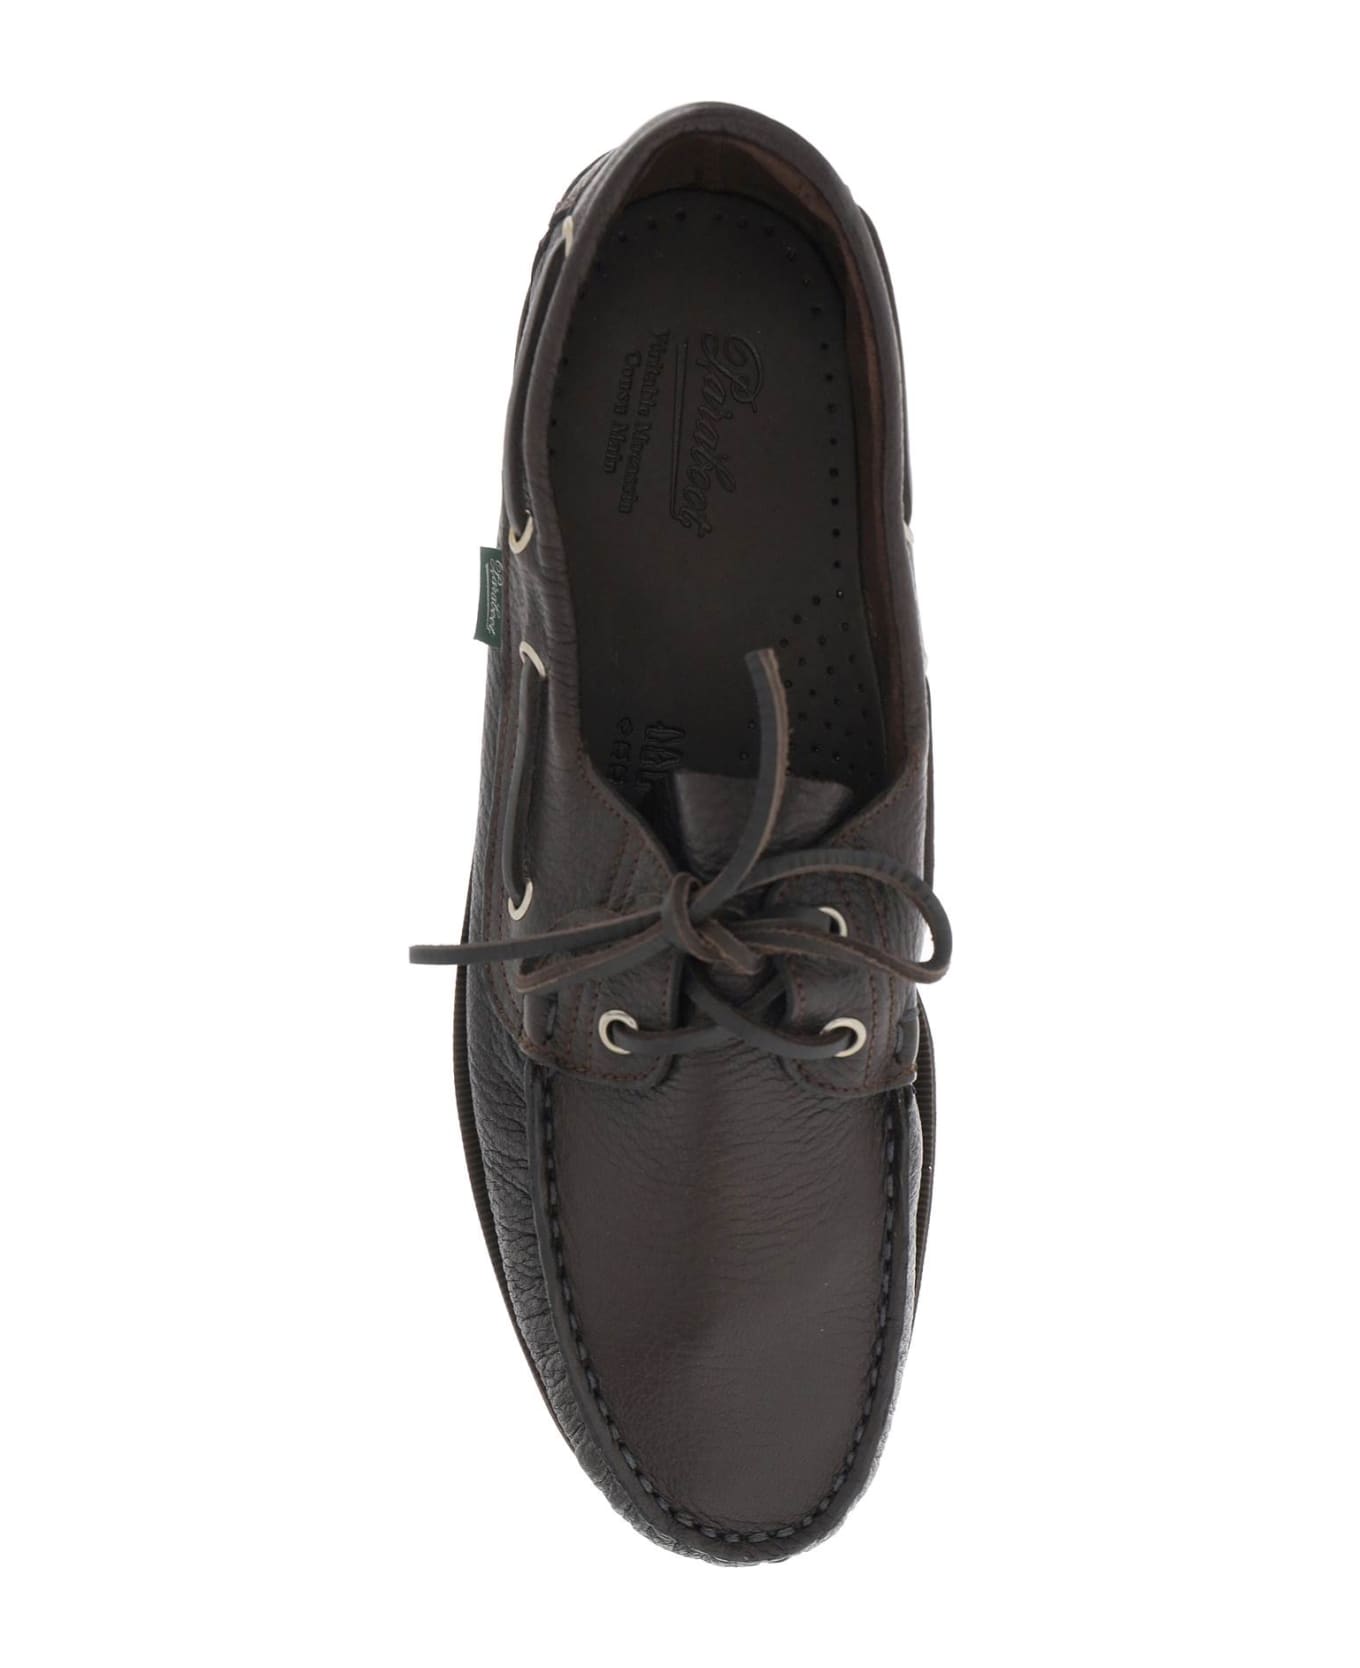 Paraboot Barth Loafers - MARRON CERF MARRON (Brown)